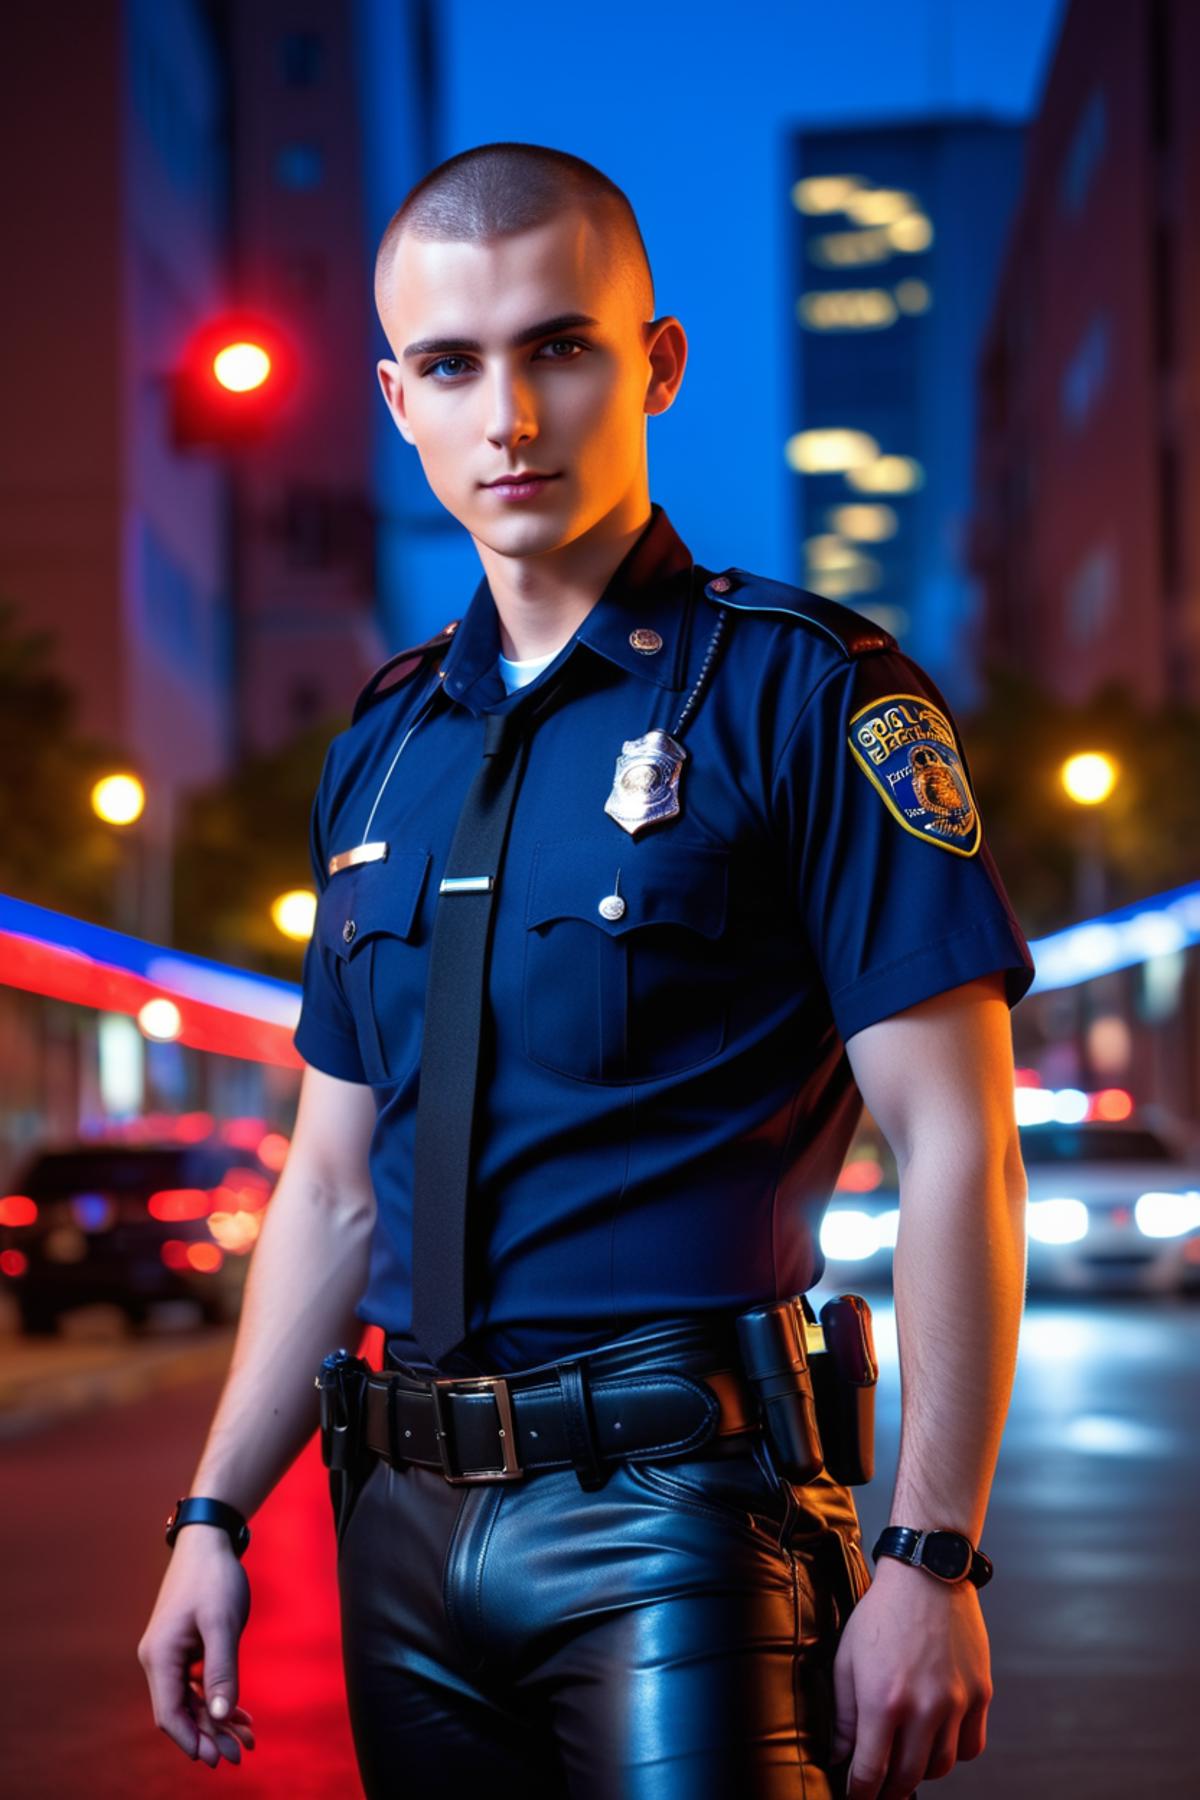 hot 25yo slim male cop, bulge, leather pants, buzzcut, duty belt, perfect eyes, red and blue police lights, (perfectly-lit...